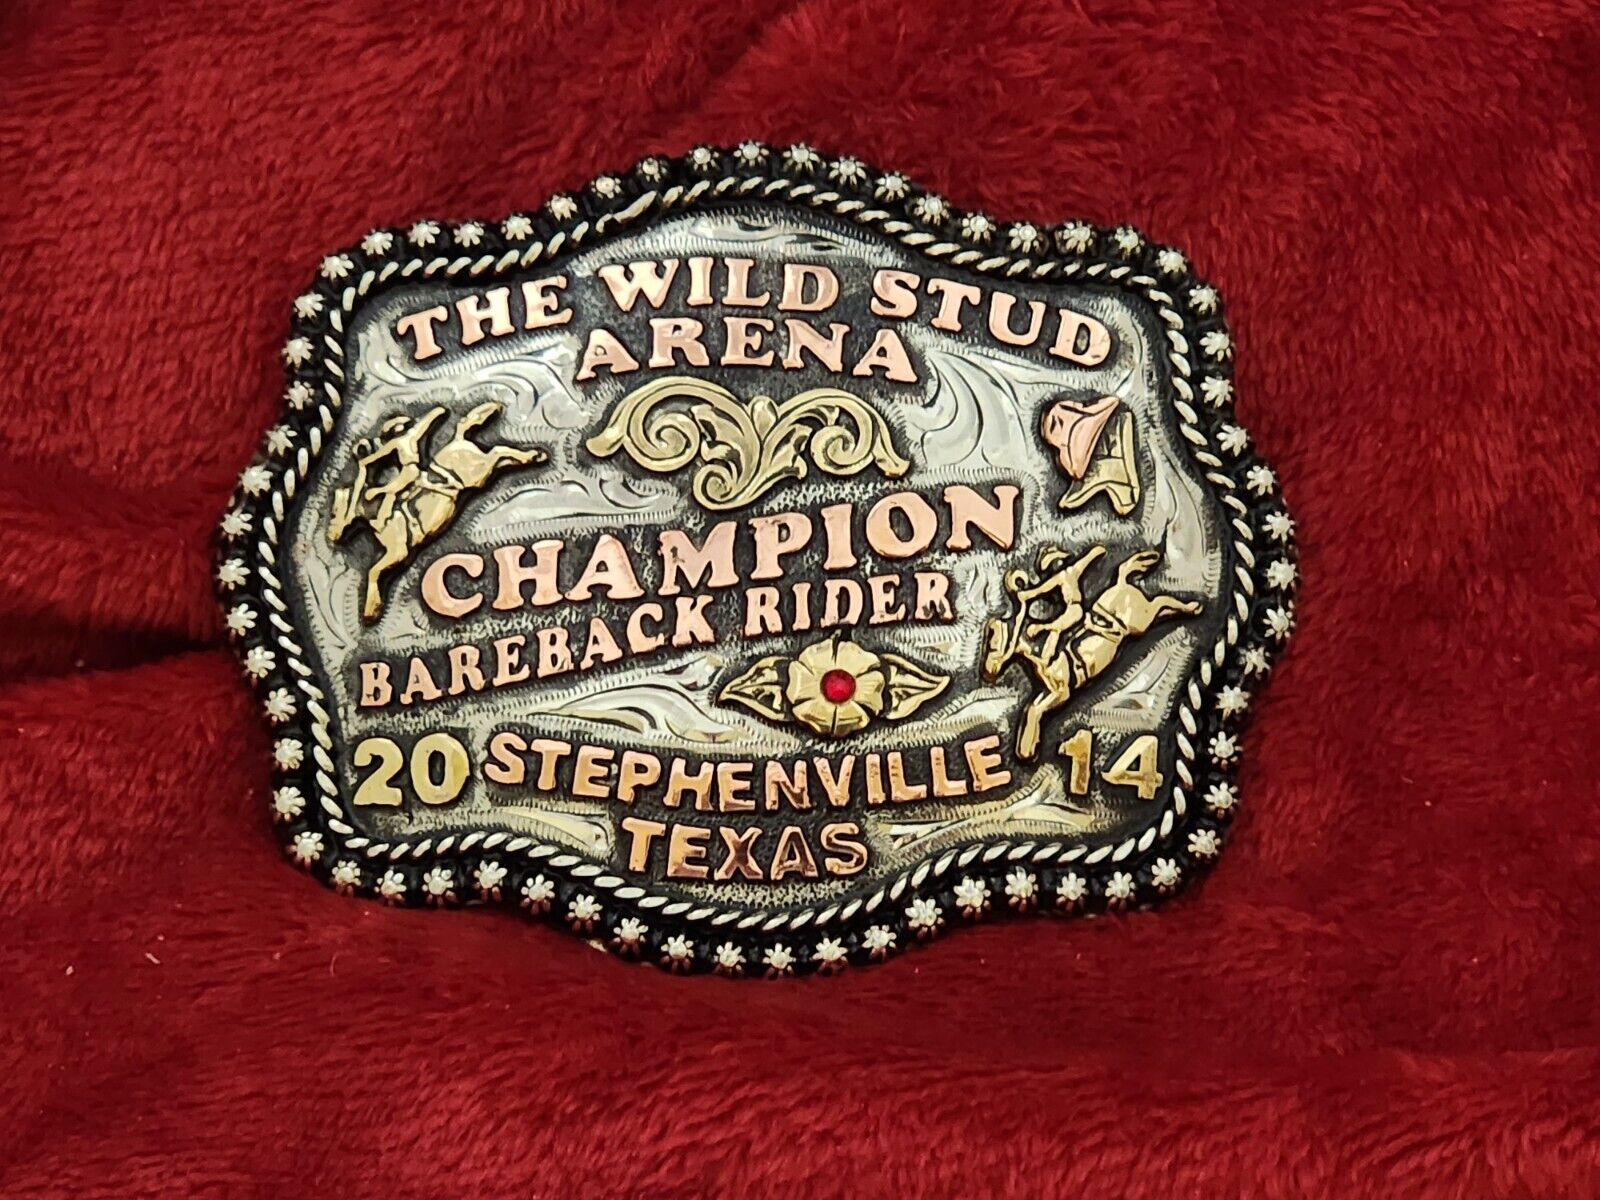 CHAMPION BRONC RIDING STEPHENVILLE TEXAS PRO RODEO TROPHY BUCKLE☆2014☆RARE☆973